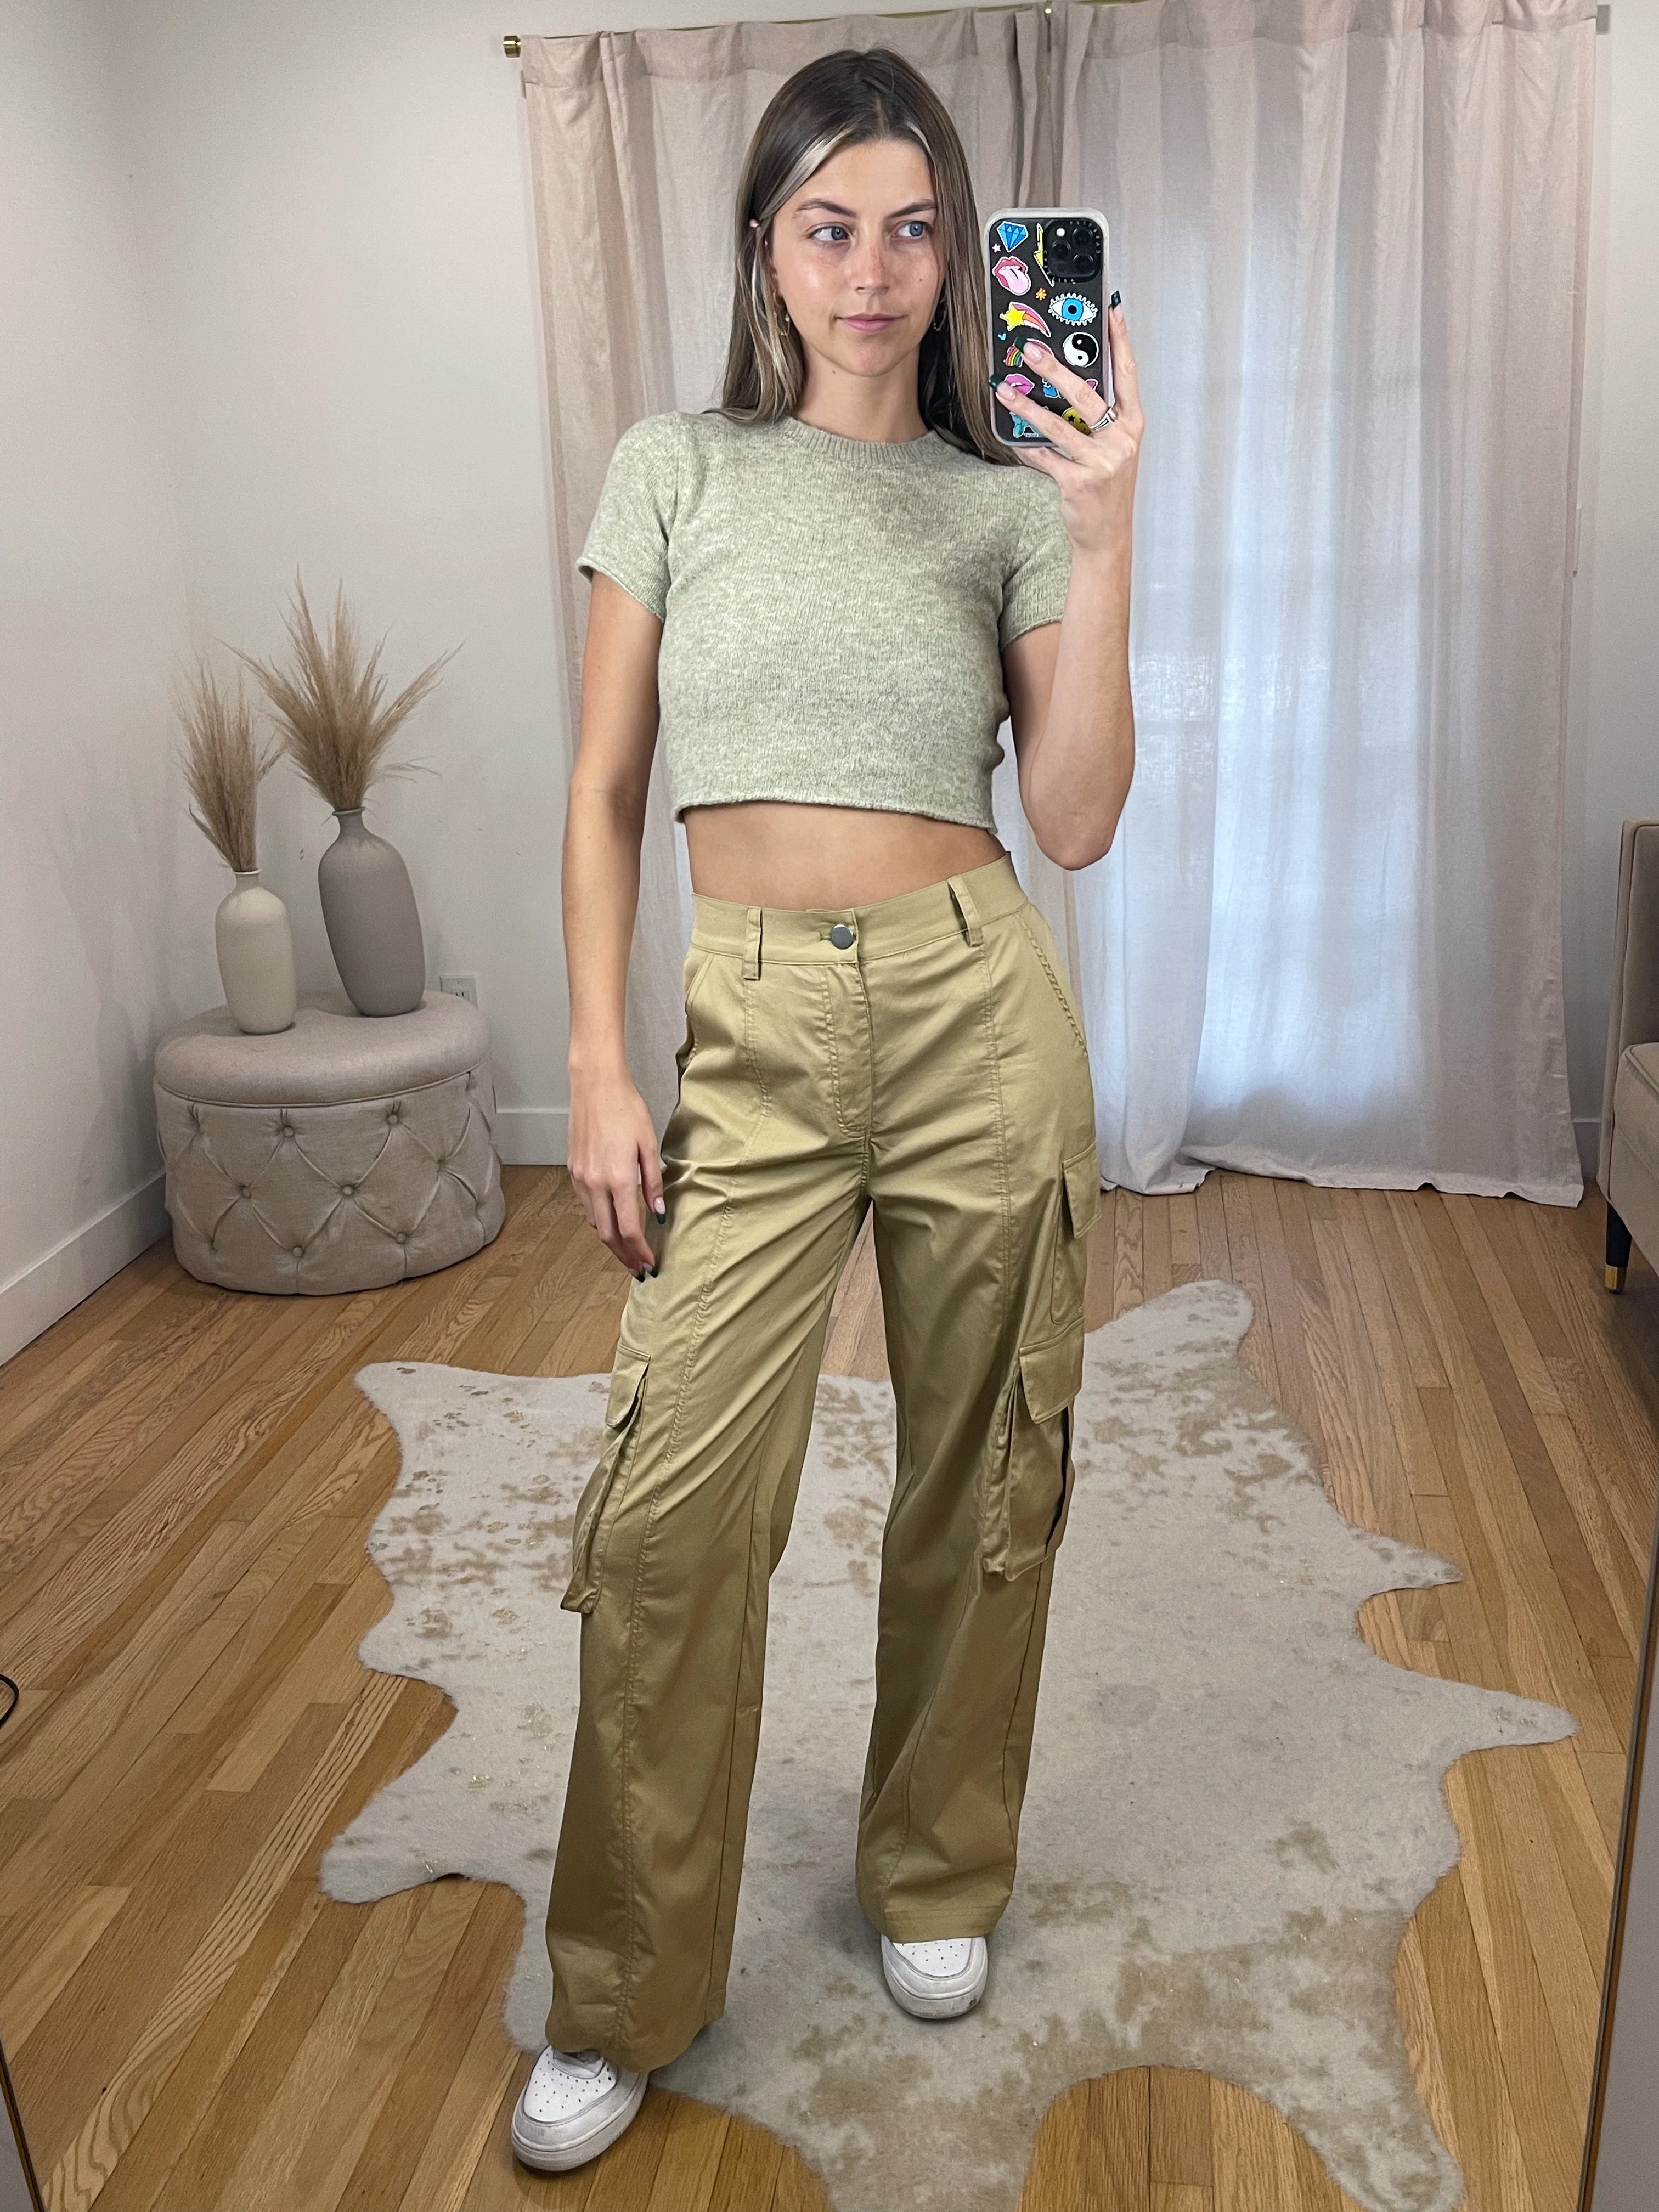 7 ways to style cargo pants that we are 100% going to try | HELLO!